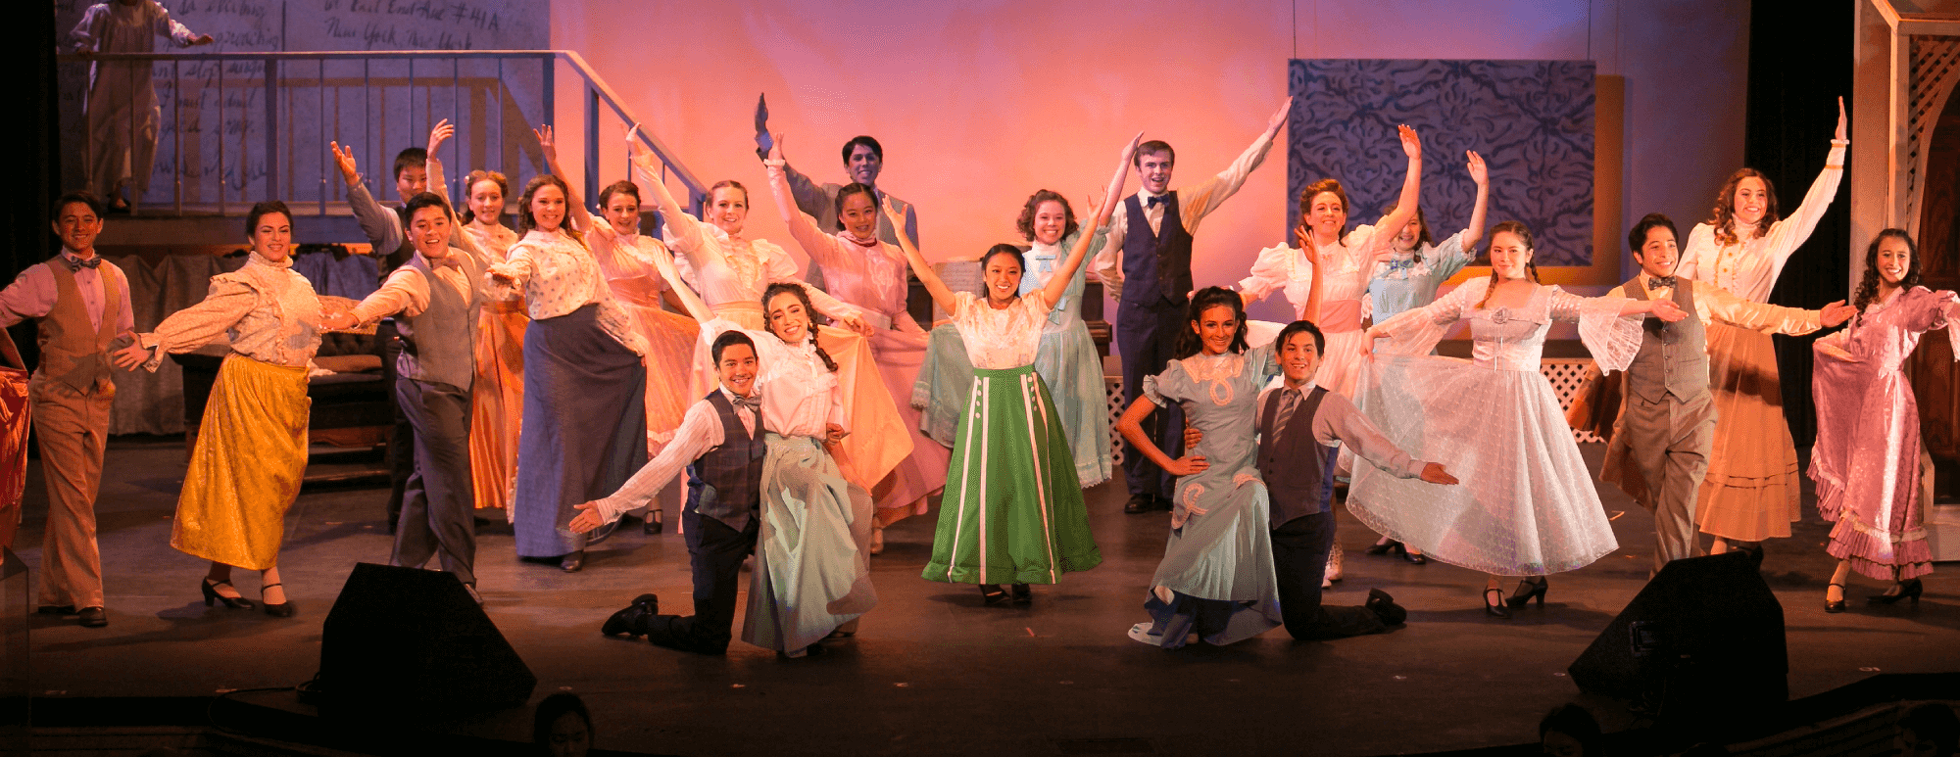 OCSA Musical Theatre Performance: The Prom